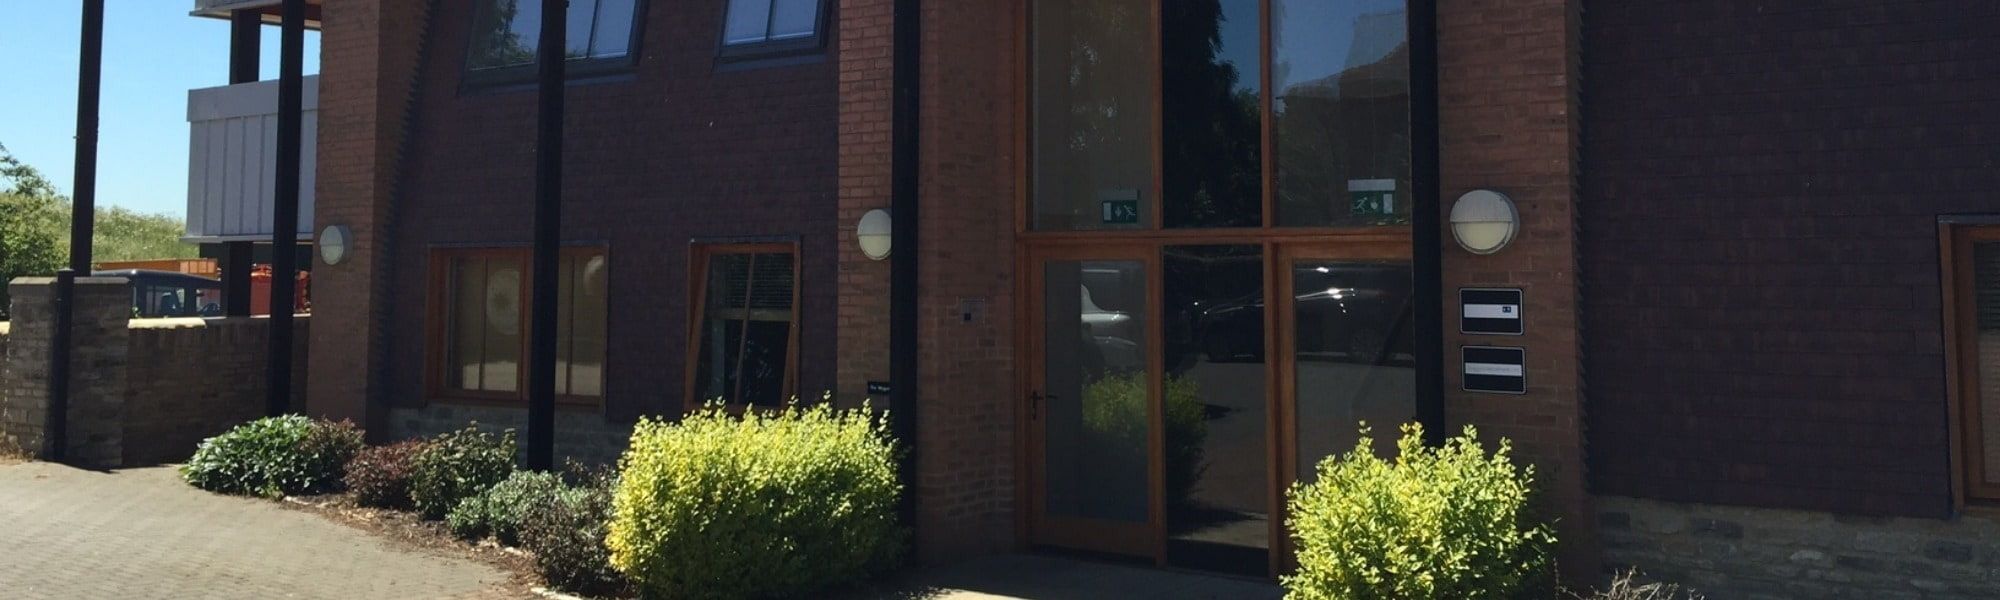 PATH Recruitment Office with windows barn conversion building